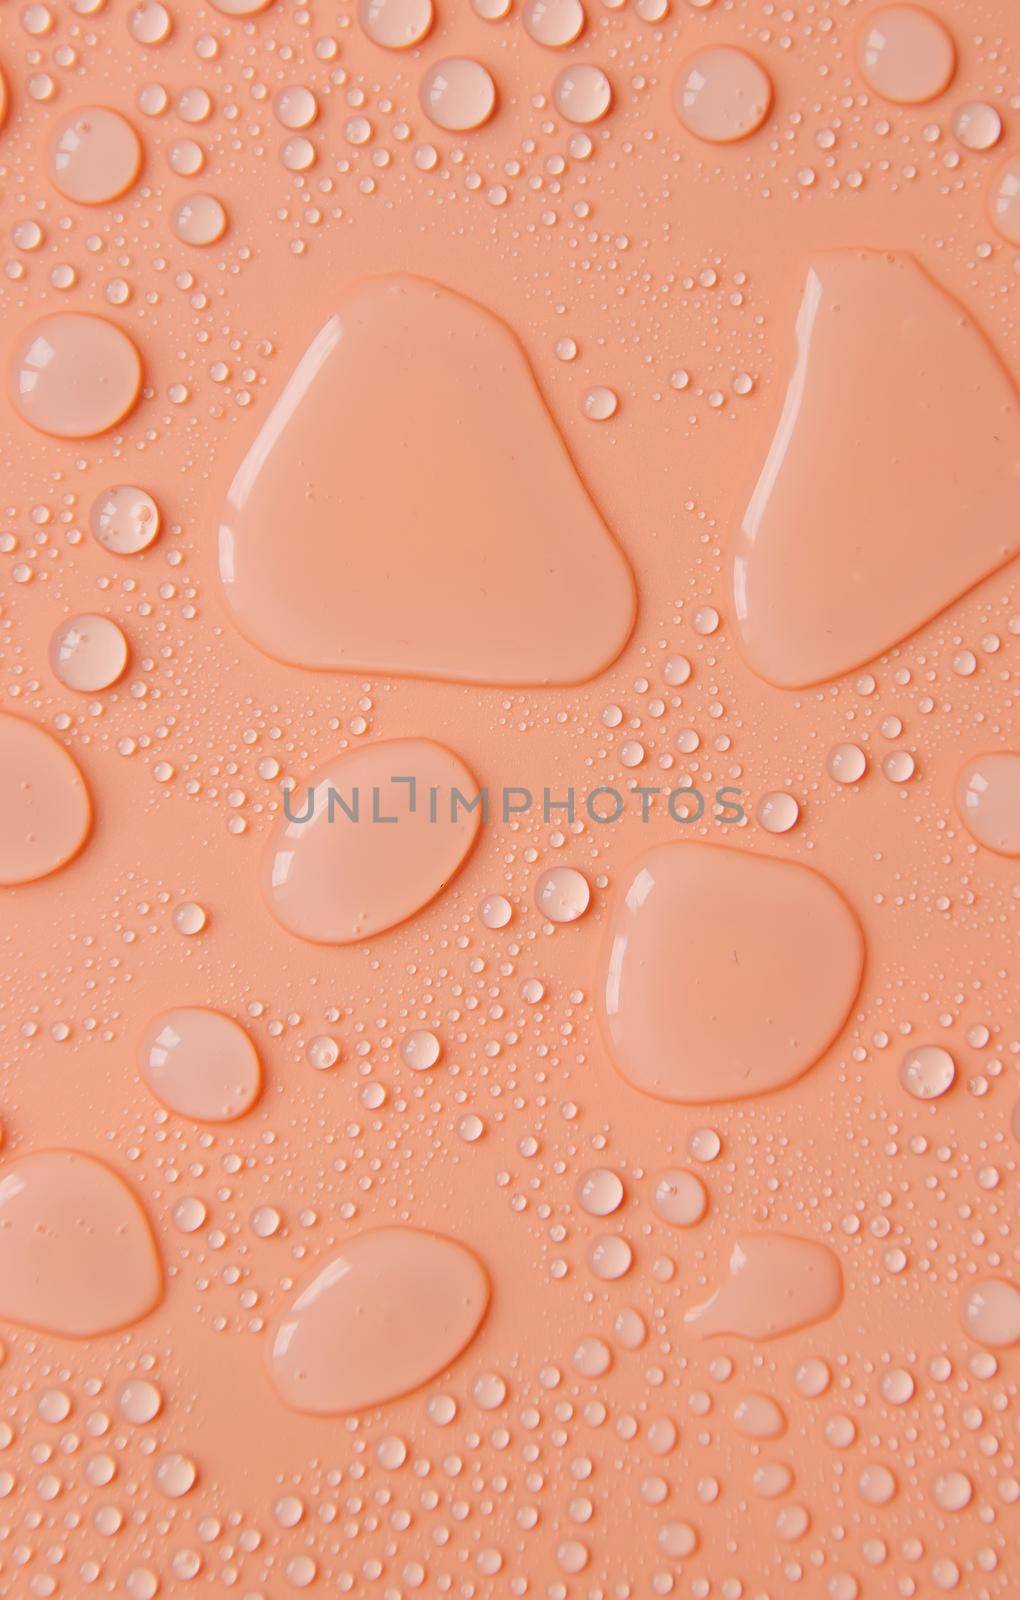 Drops of liquid, moisturizing cosmetic product. Hyaluronic acid. Selective focus. Nature.